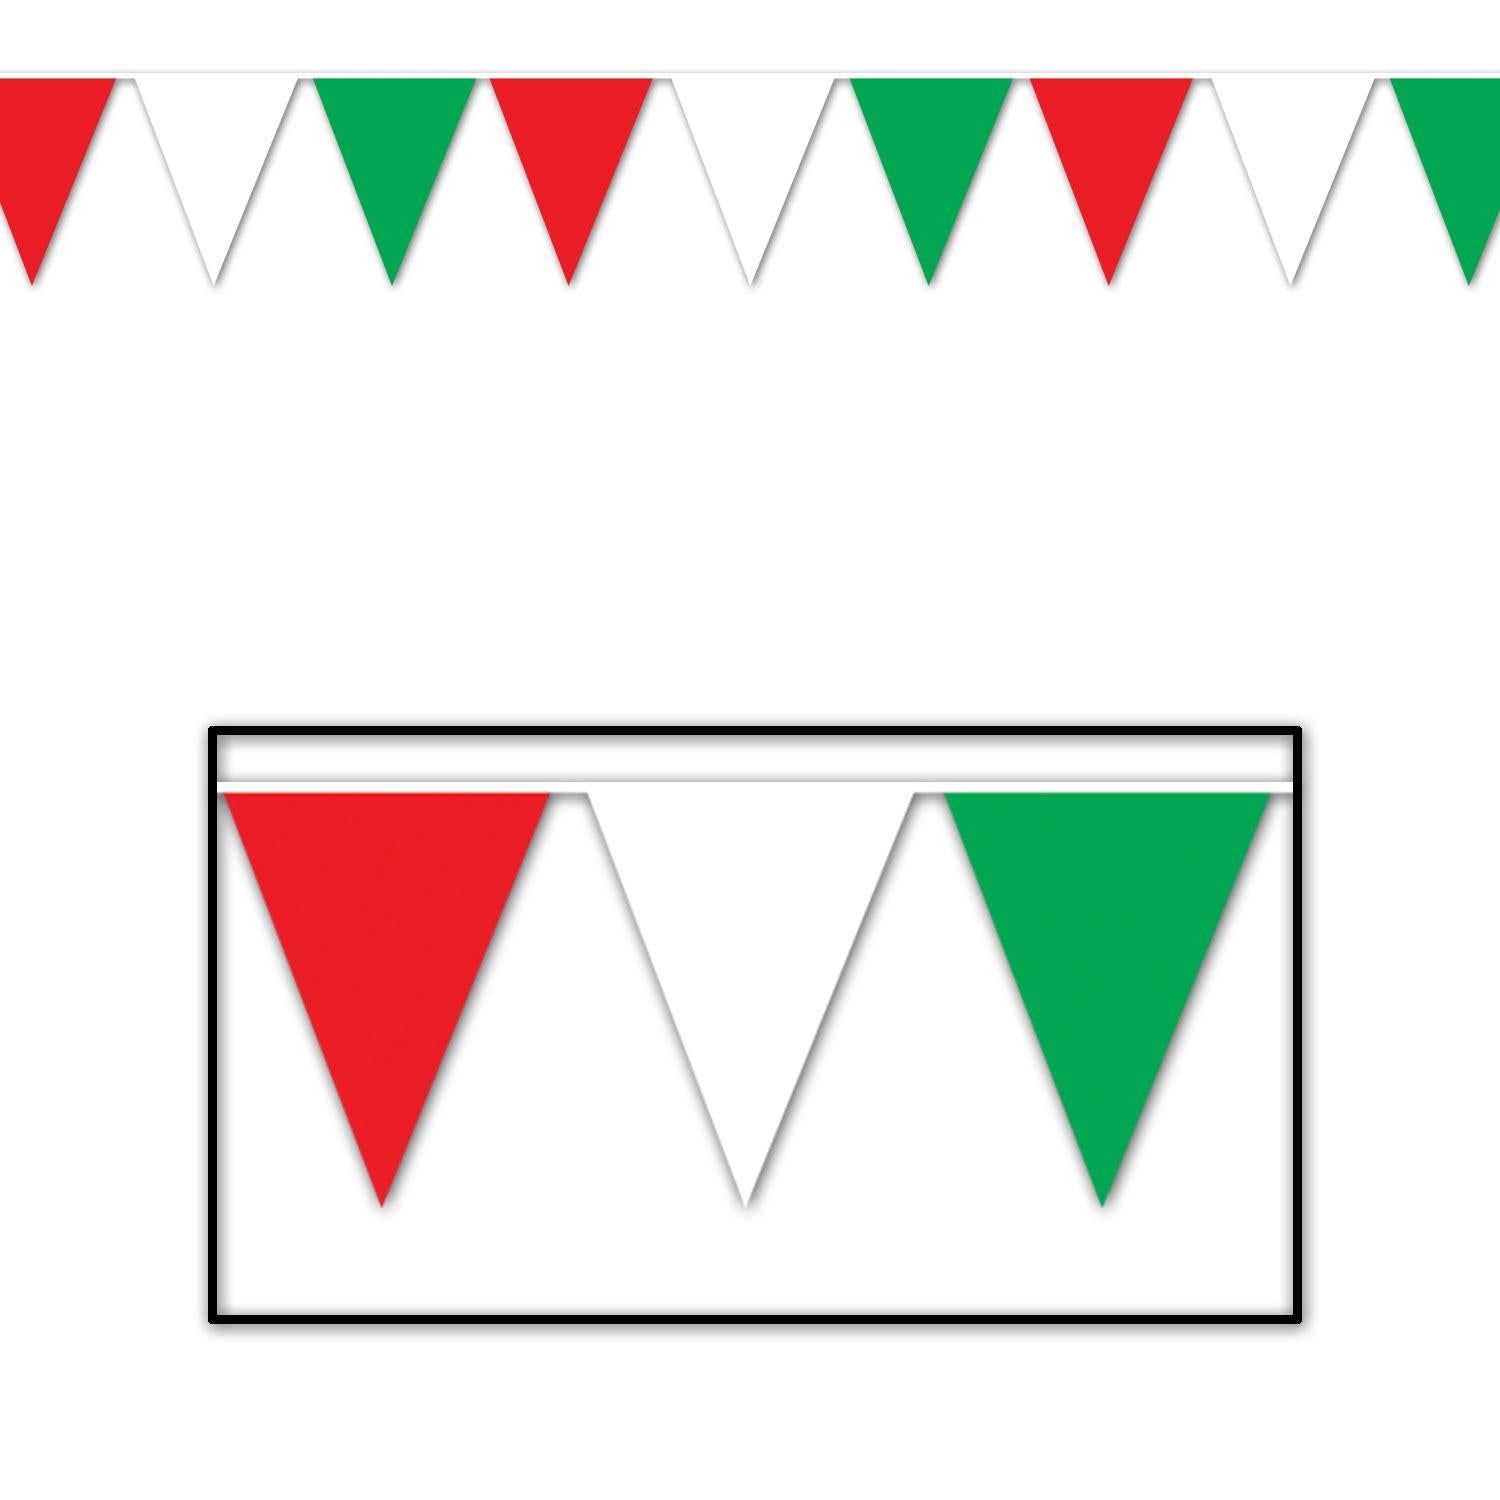 Beistle Red, White & Green Pennant Banner